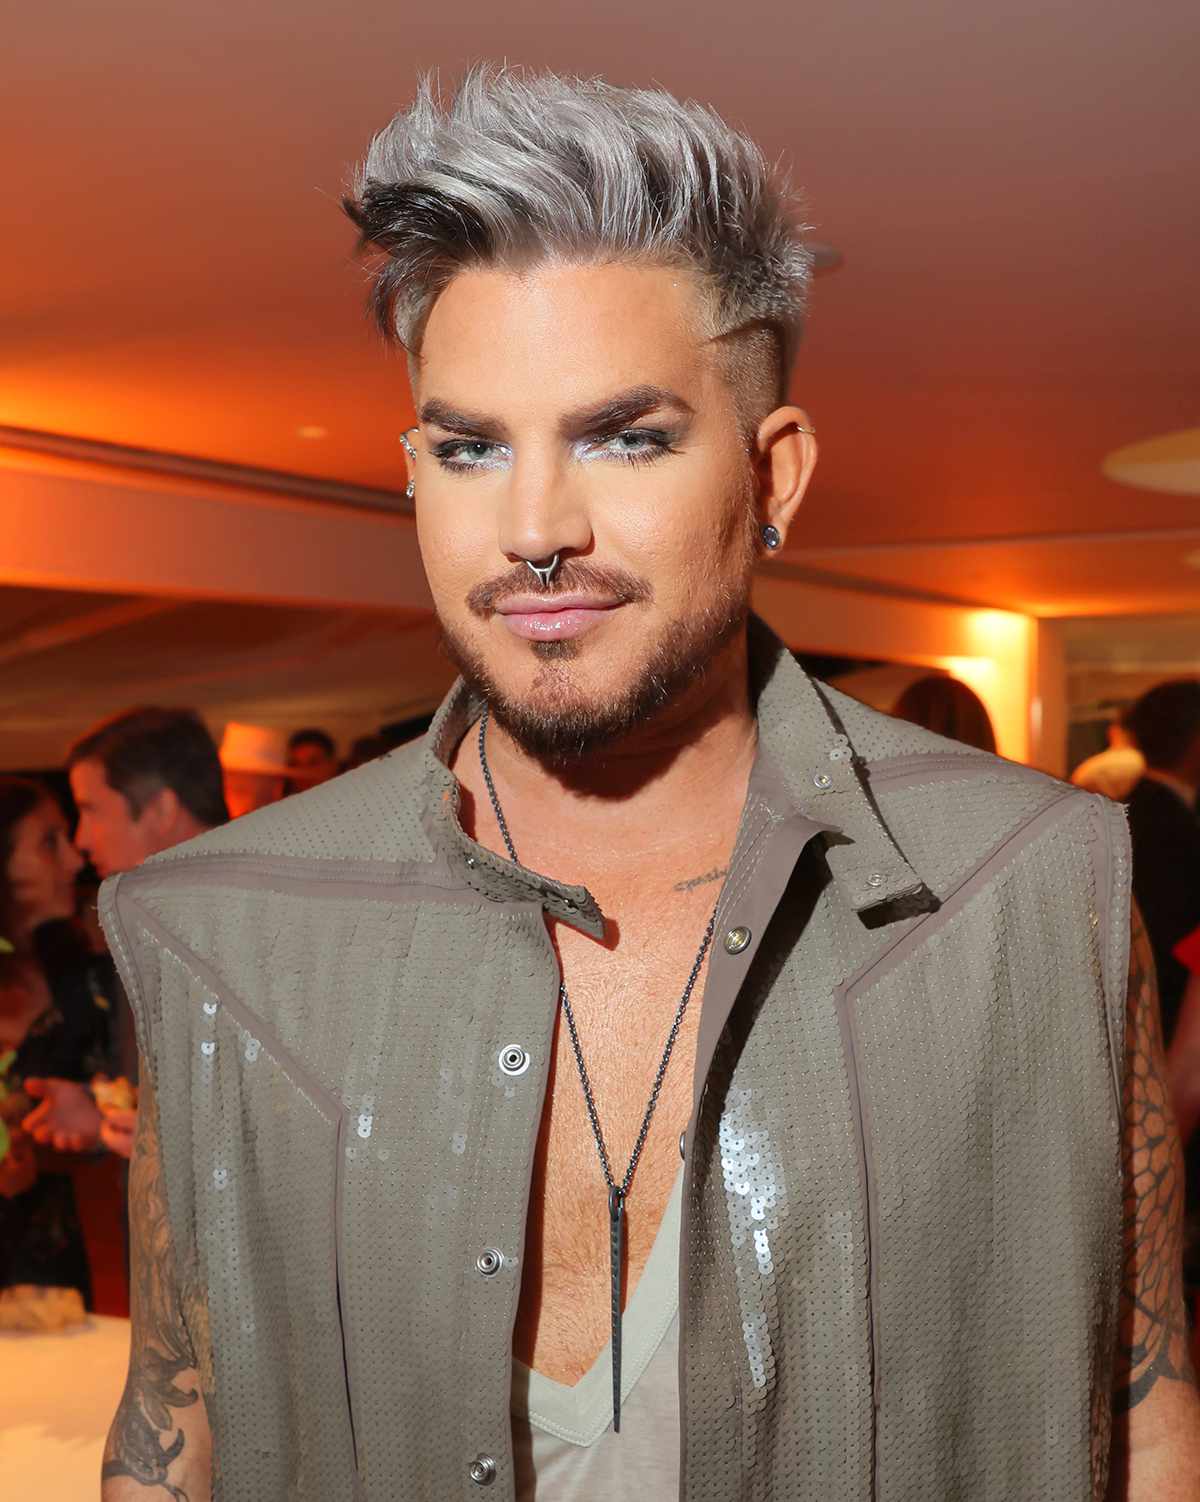  Adam Lambert attends the Cannes Film Festival Air Mail Party at Hotel du Cap-Eden-Roc on May 23, 2023 in Cap d'Antibes, France. 